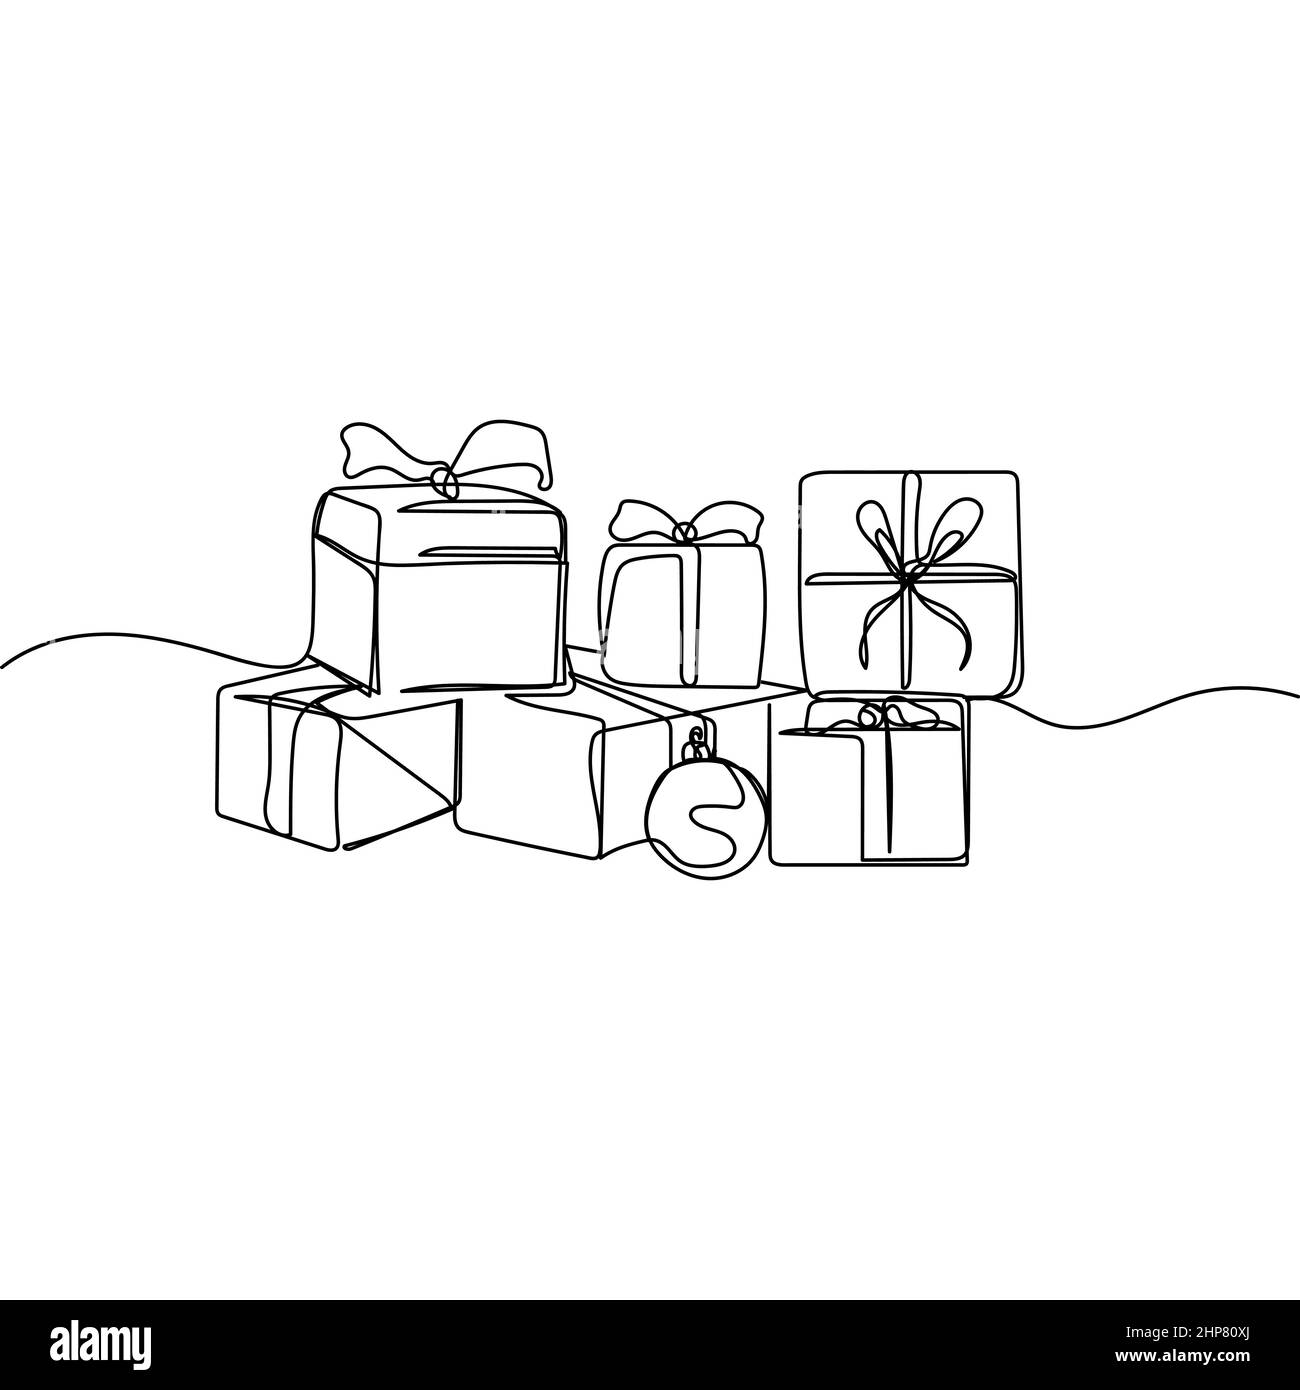 how to draw gift box simple step by step